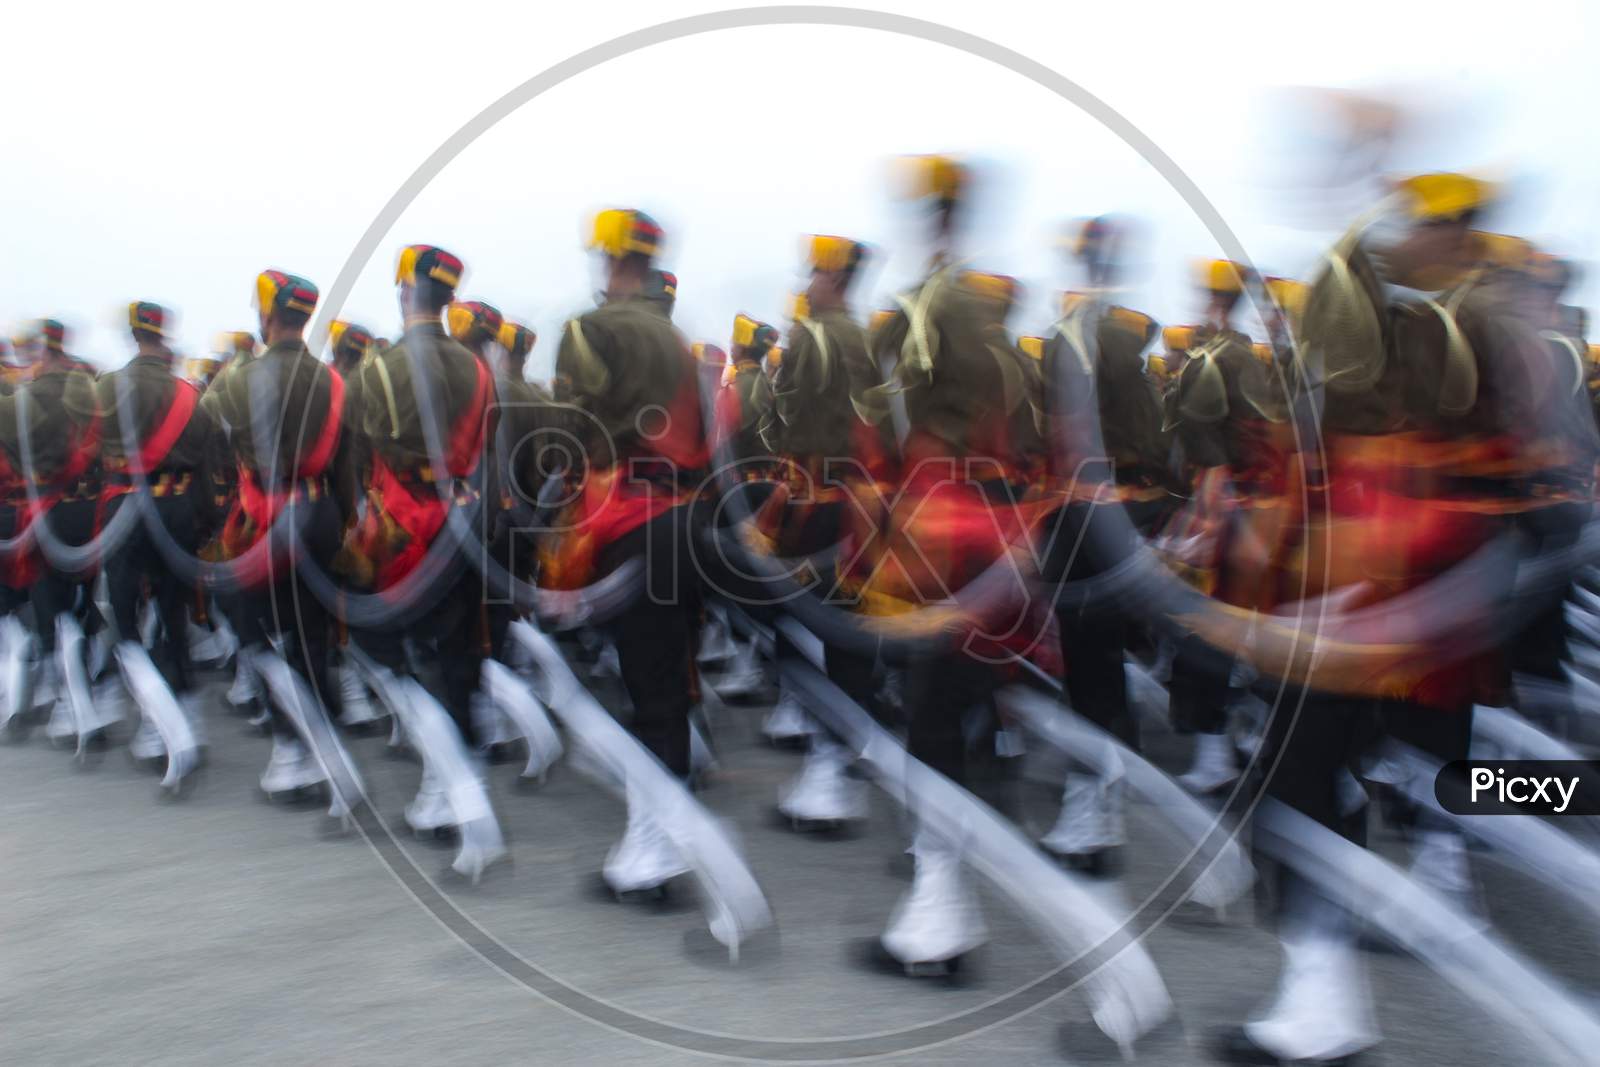 Army Battalion Marching On The Republic Day Parade Of India 2021 Captured In Slow Shutter Speed To Create Abstract Effect Of The Hands.